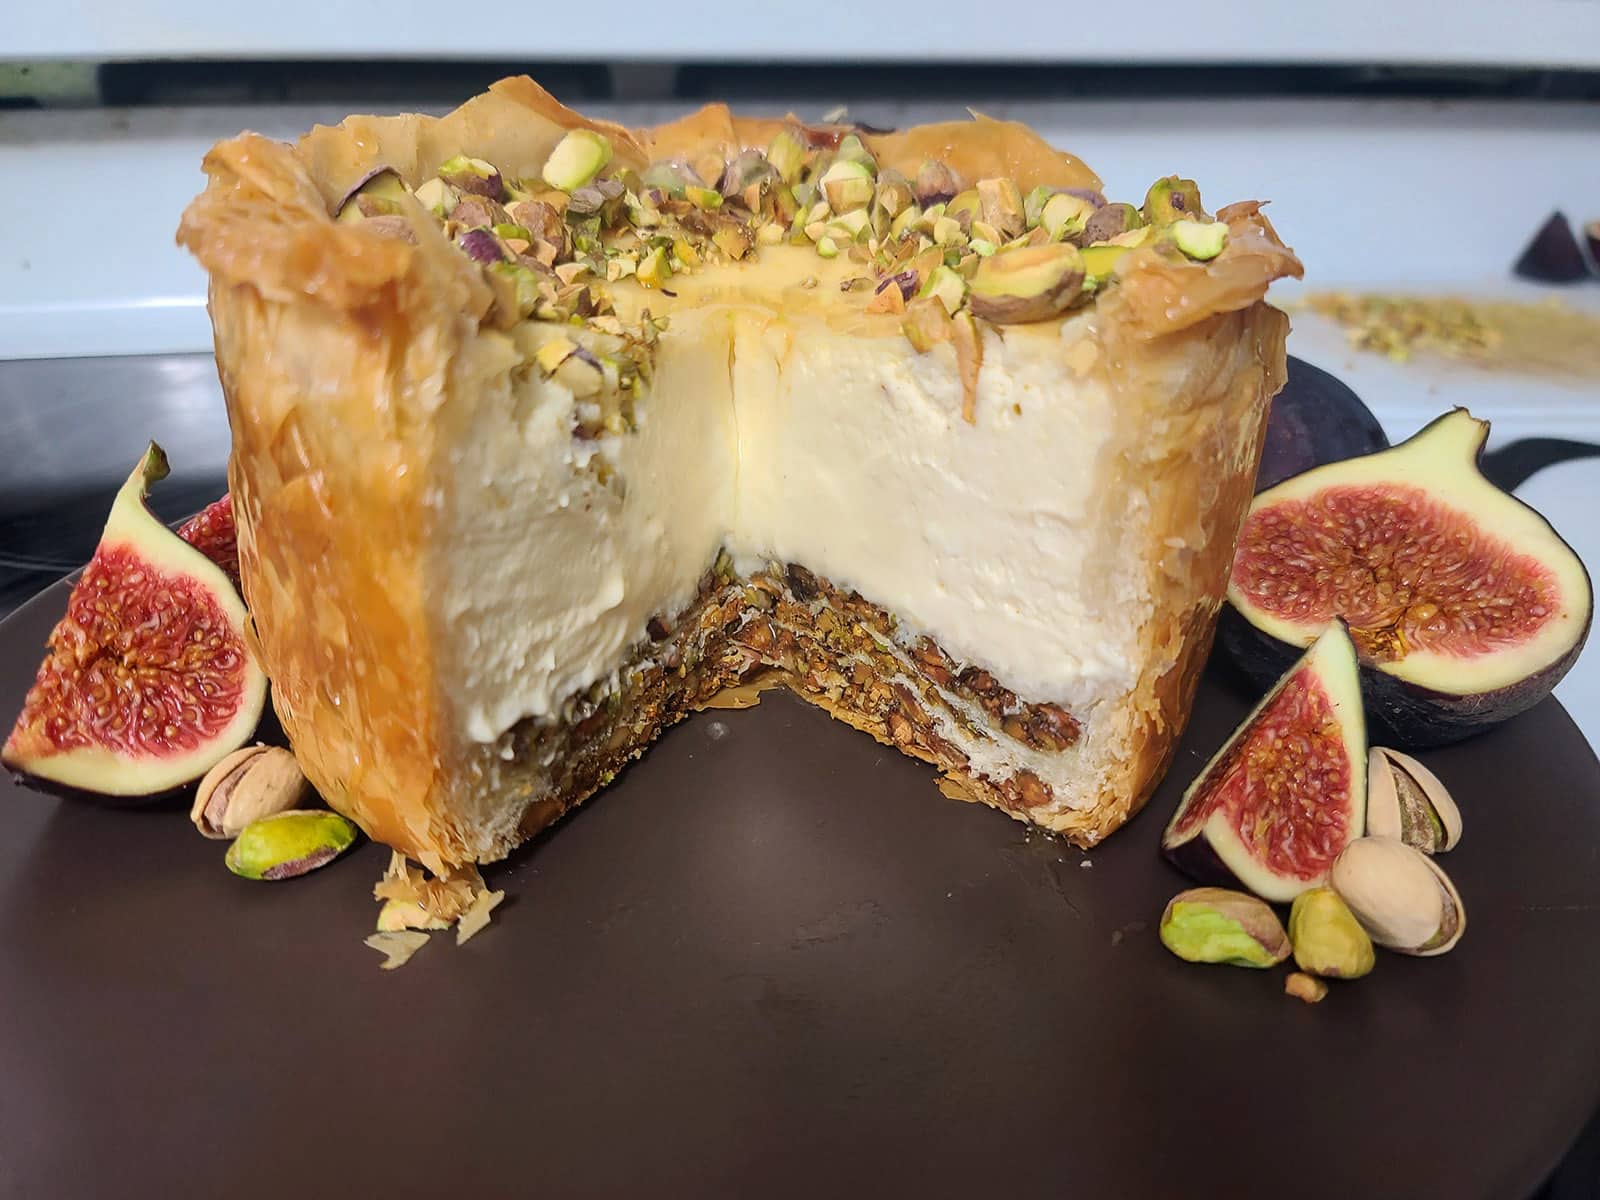 The finished baklava cheesecake, on a stovetop, with figs around it.